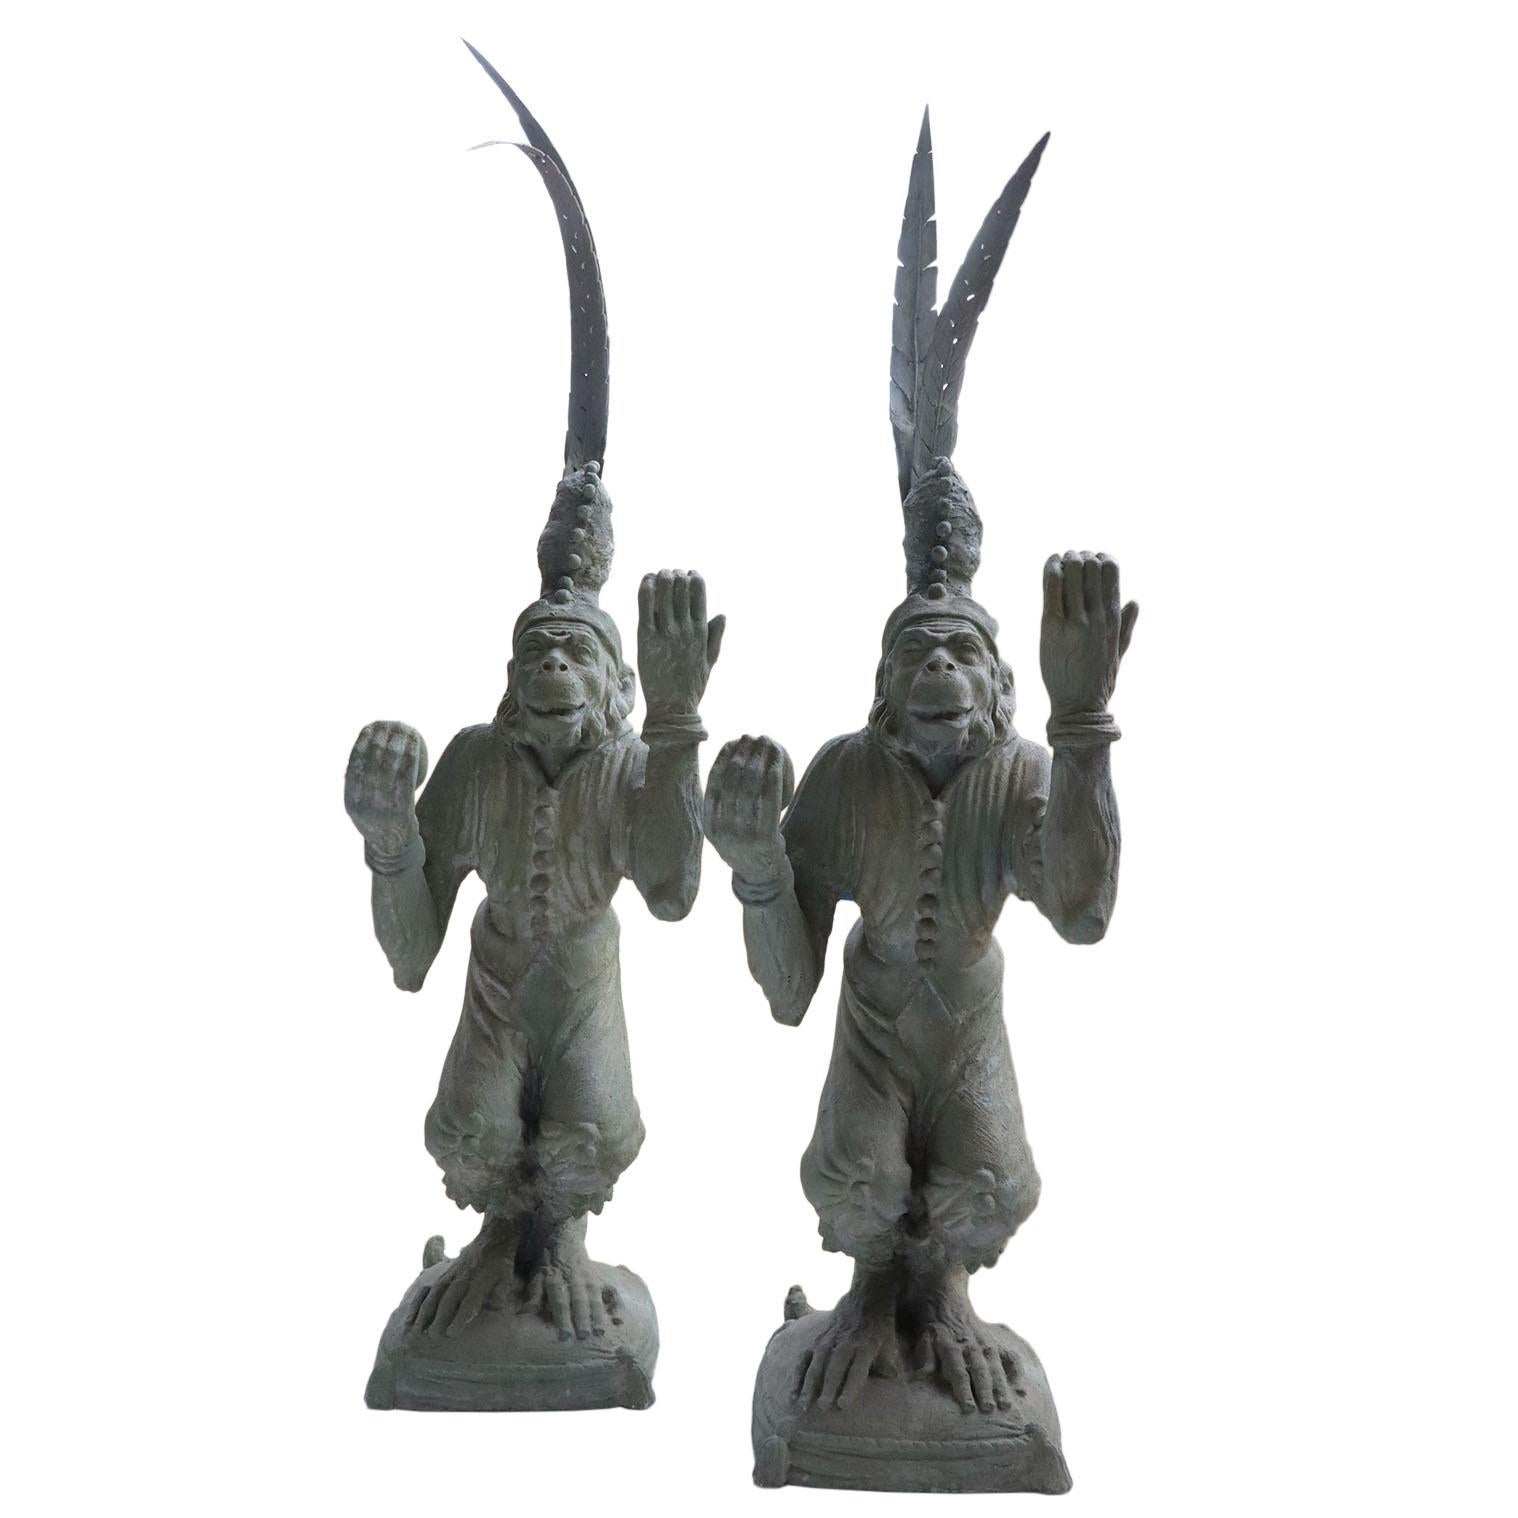 A pair of playful juggling monkeys made of resin. Resting upon a sturdy base measuring 14.5